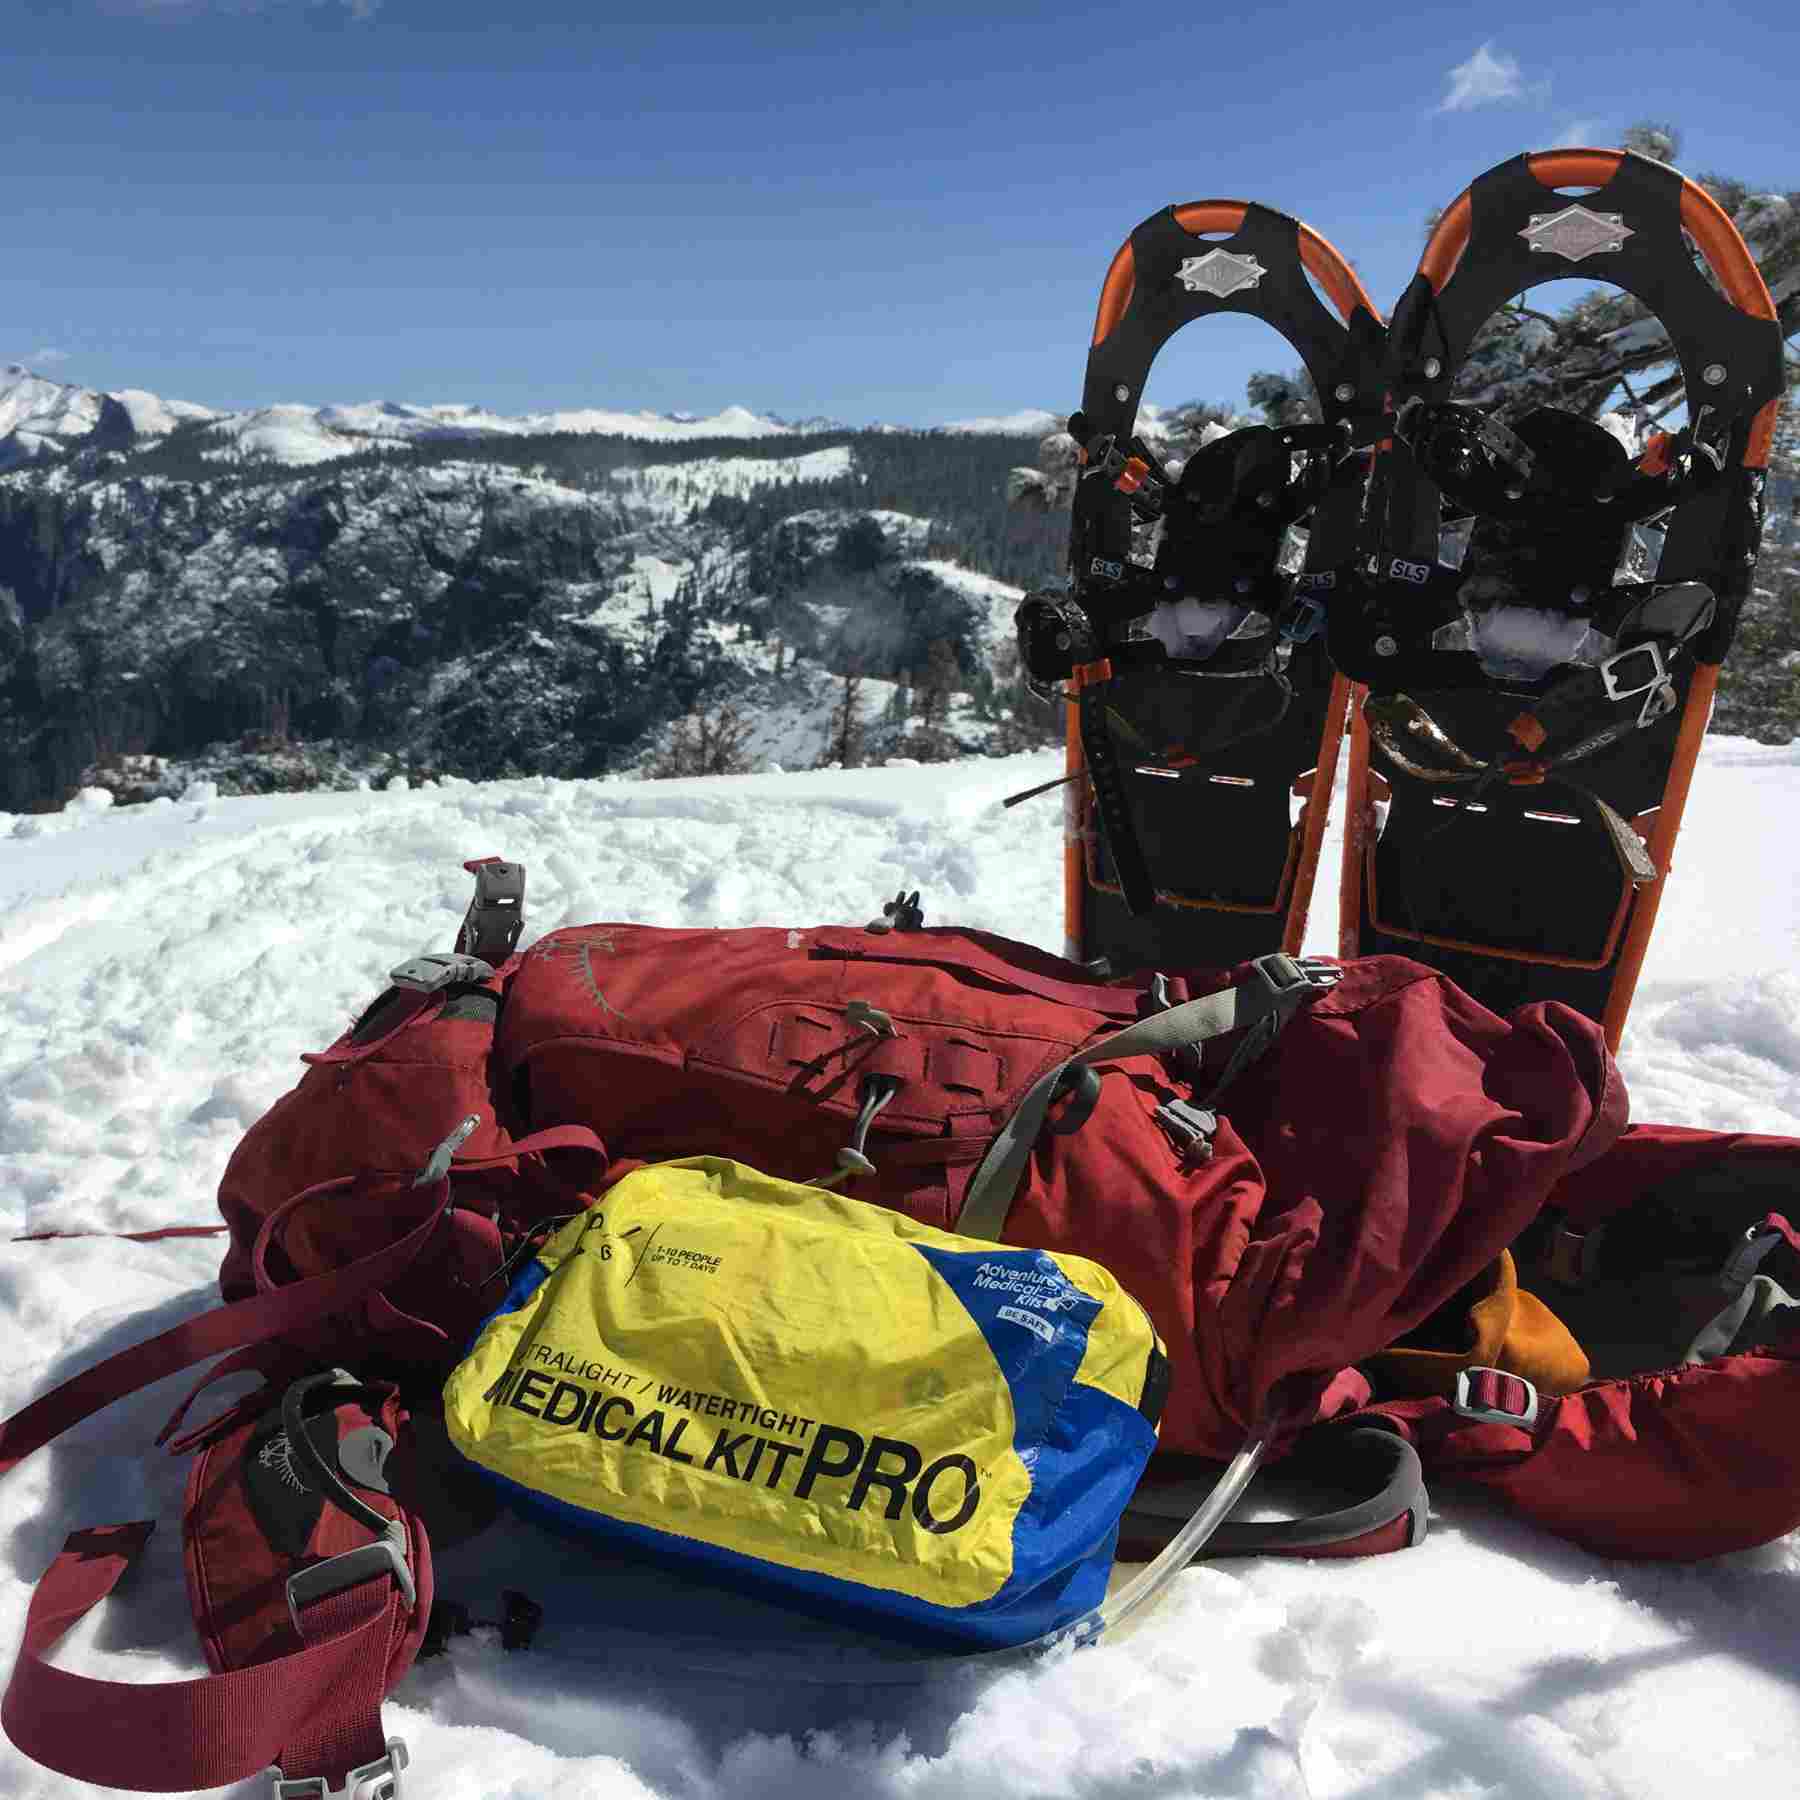 Ultralight/Watertight Medical Kit - Pro next to backpack and snowshoes in the snow